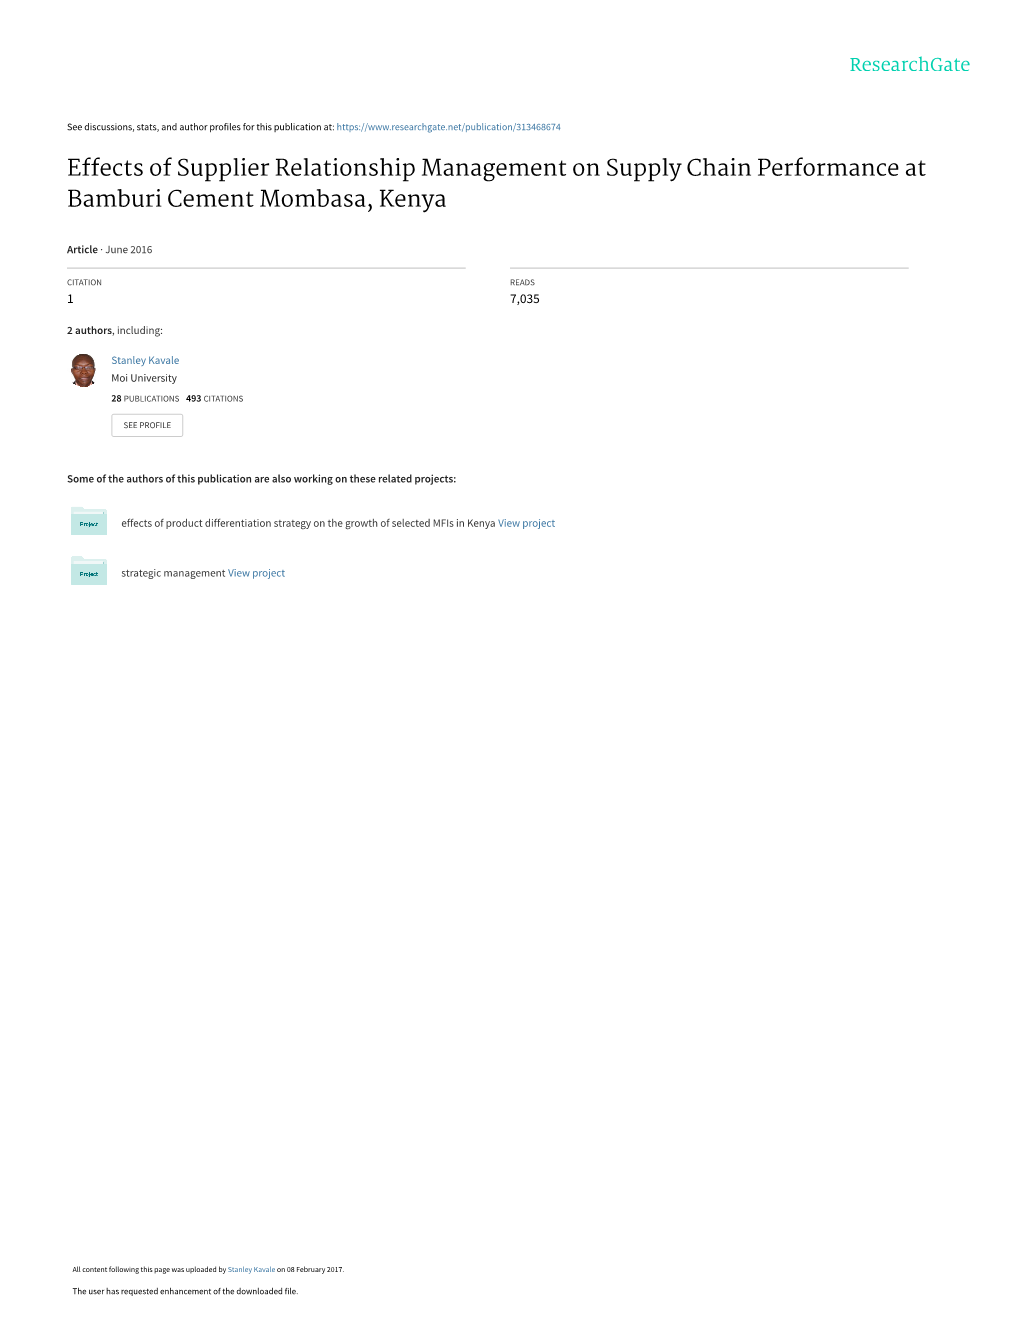 Effects of Supplier Relationship Management on Supply Chain Performance at Bamburi Cement Mombasa, Kenya